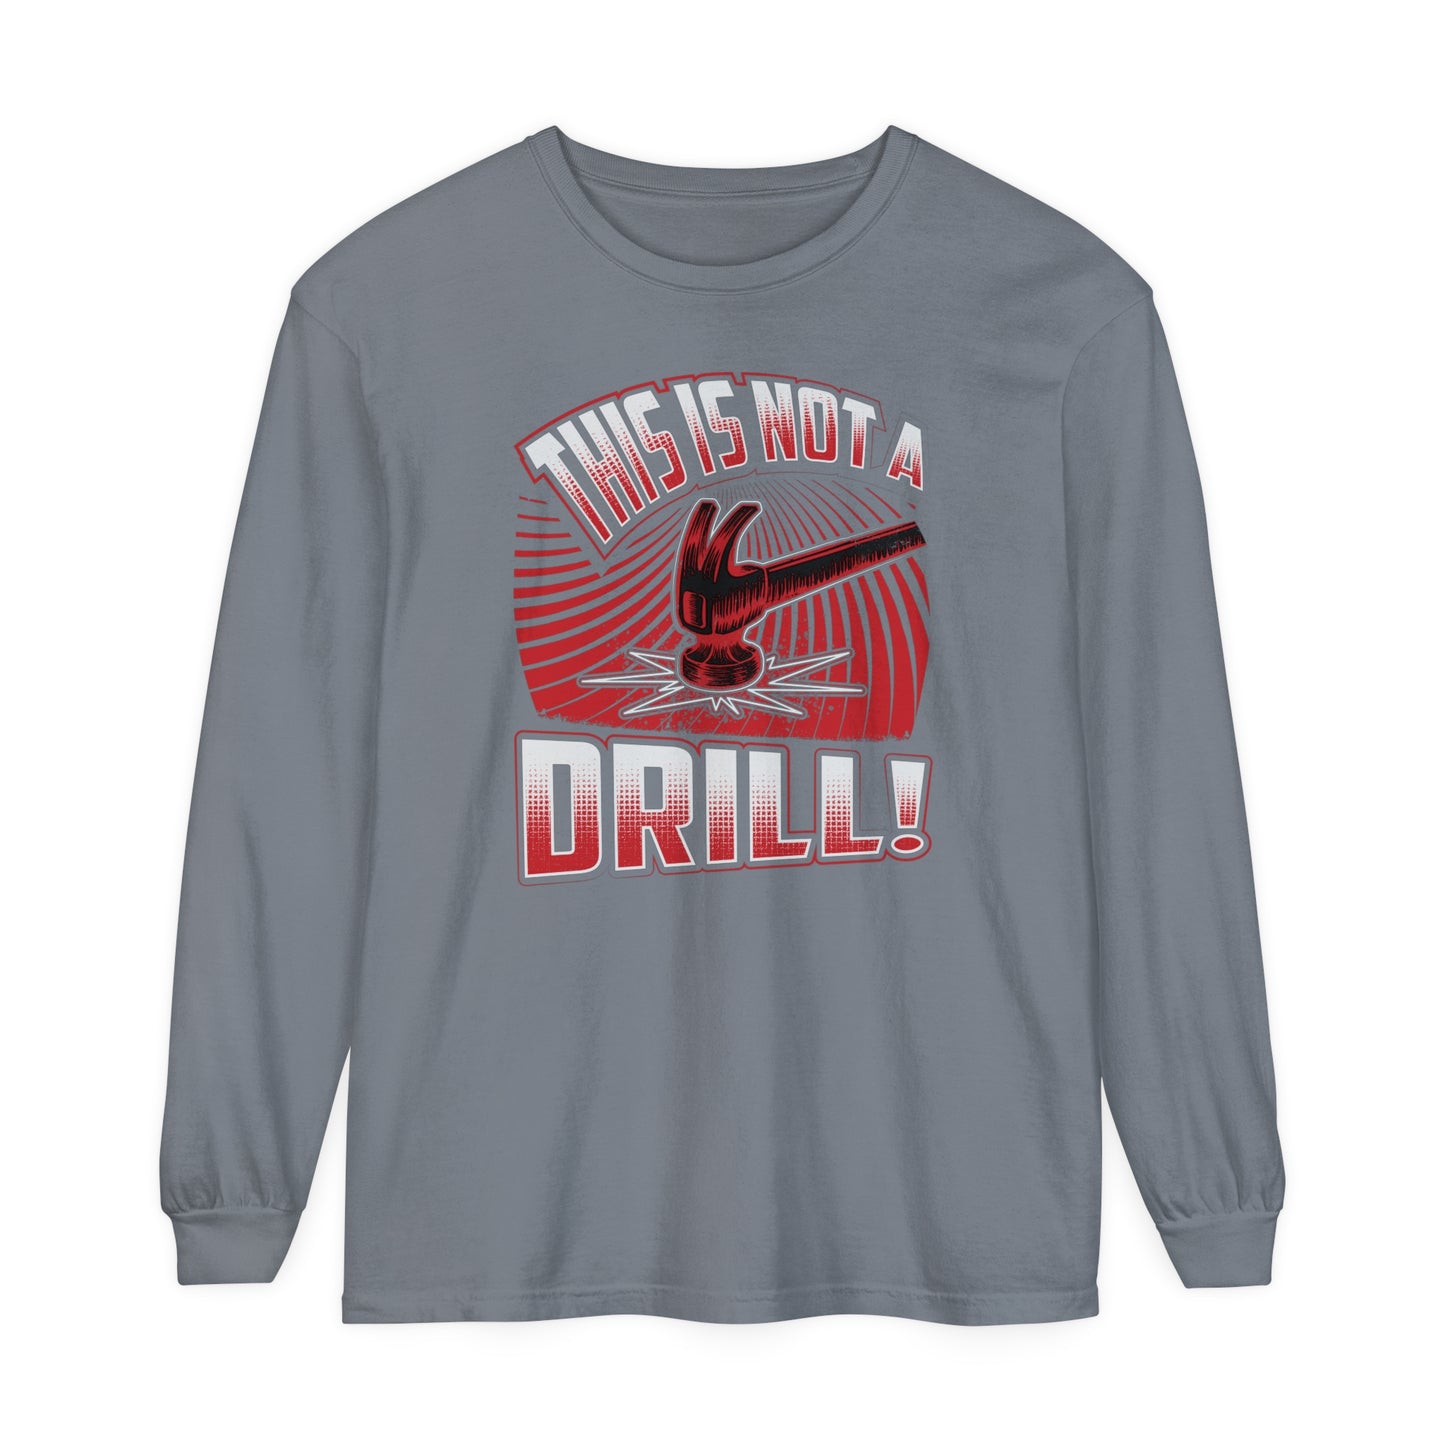 Not A Drill Long Sleeve